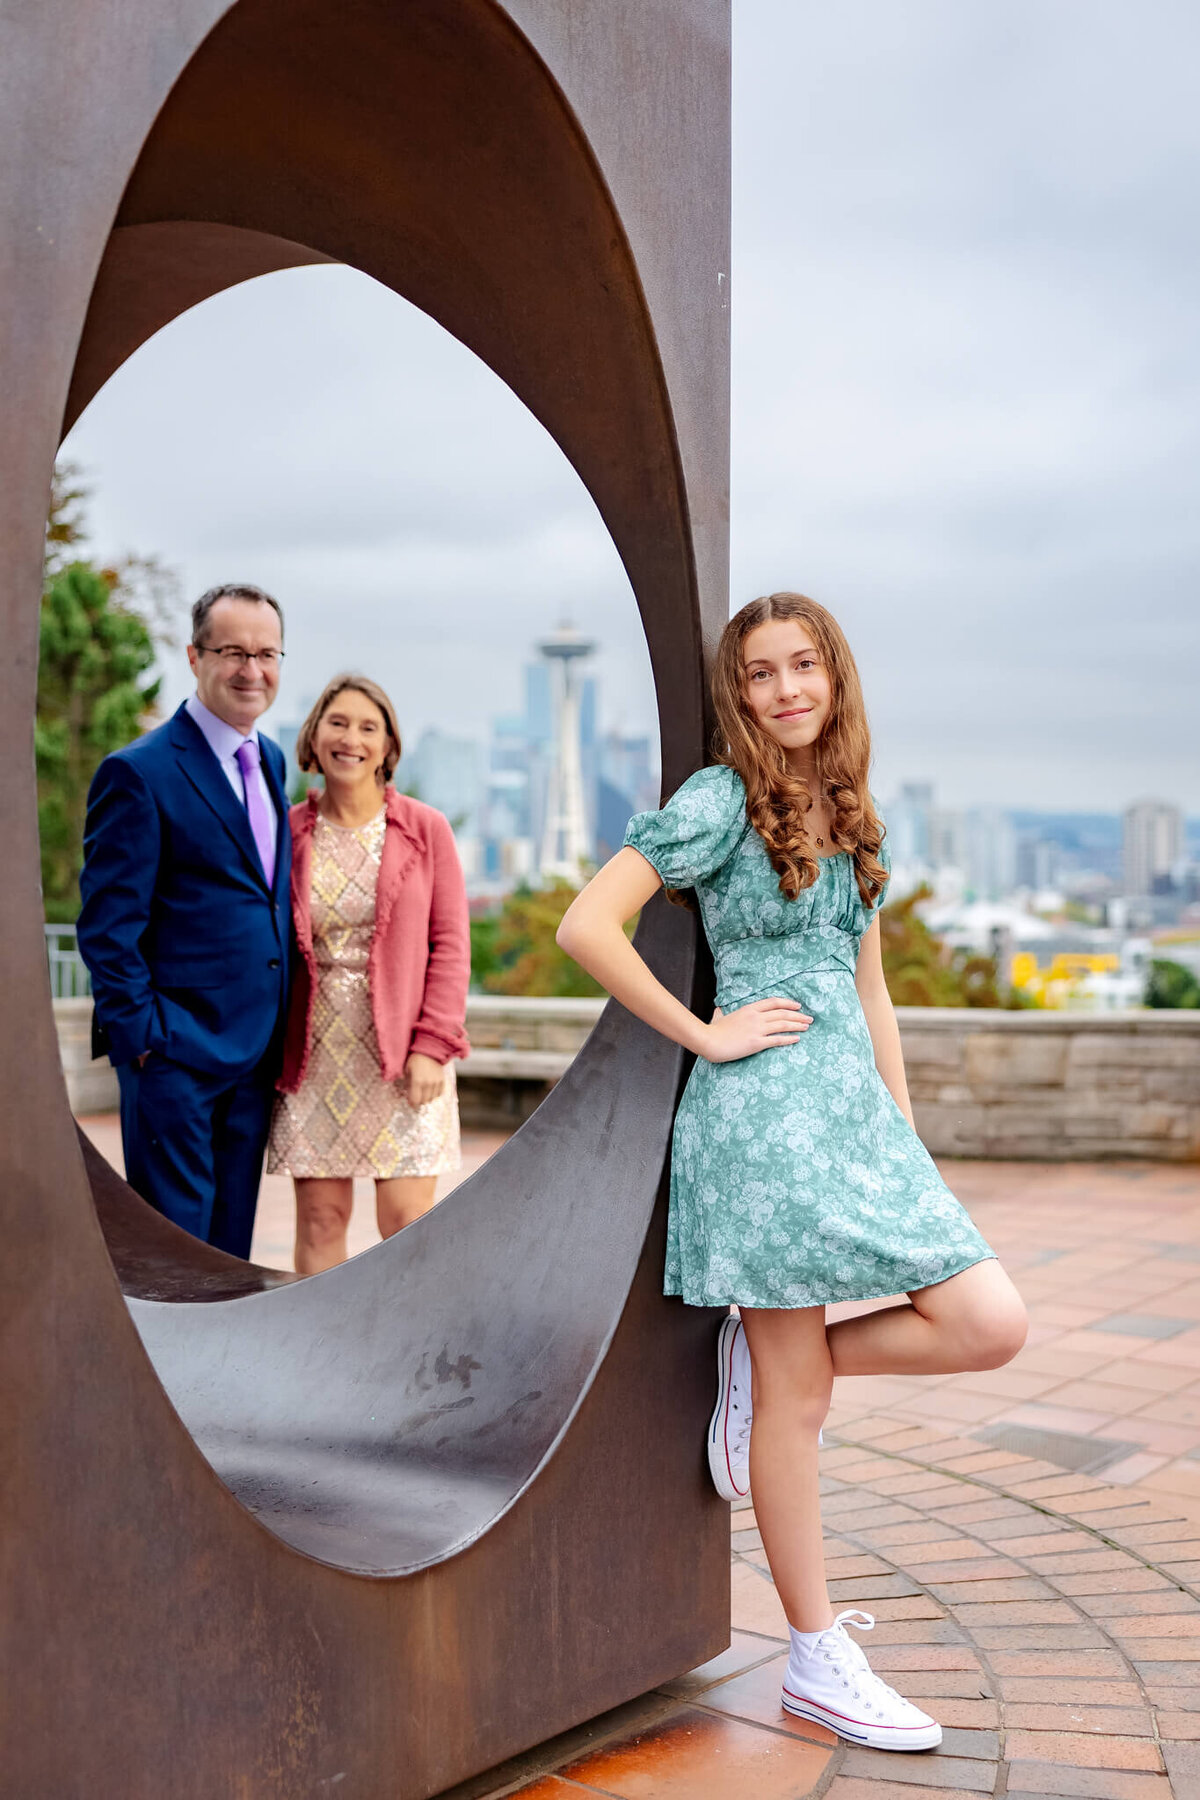 A teenage girl in a floral print dress leans against a sculpture in a park while mom and dad look on